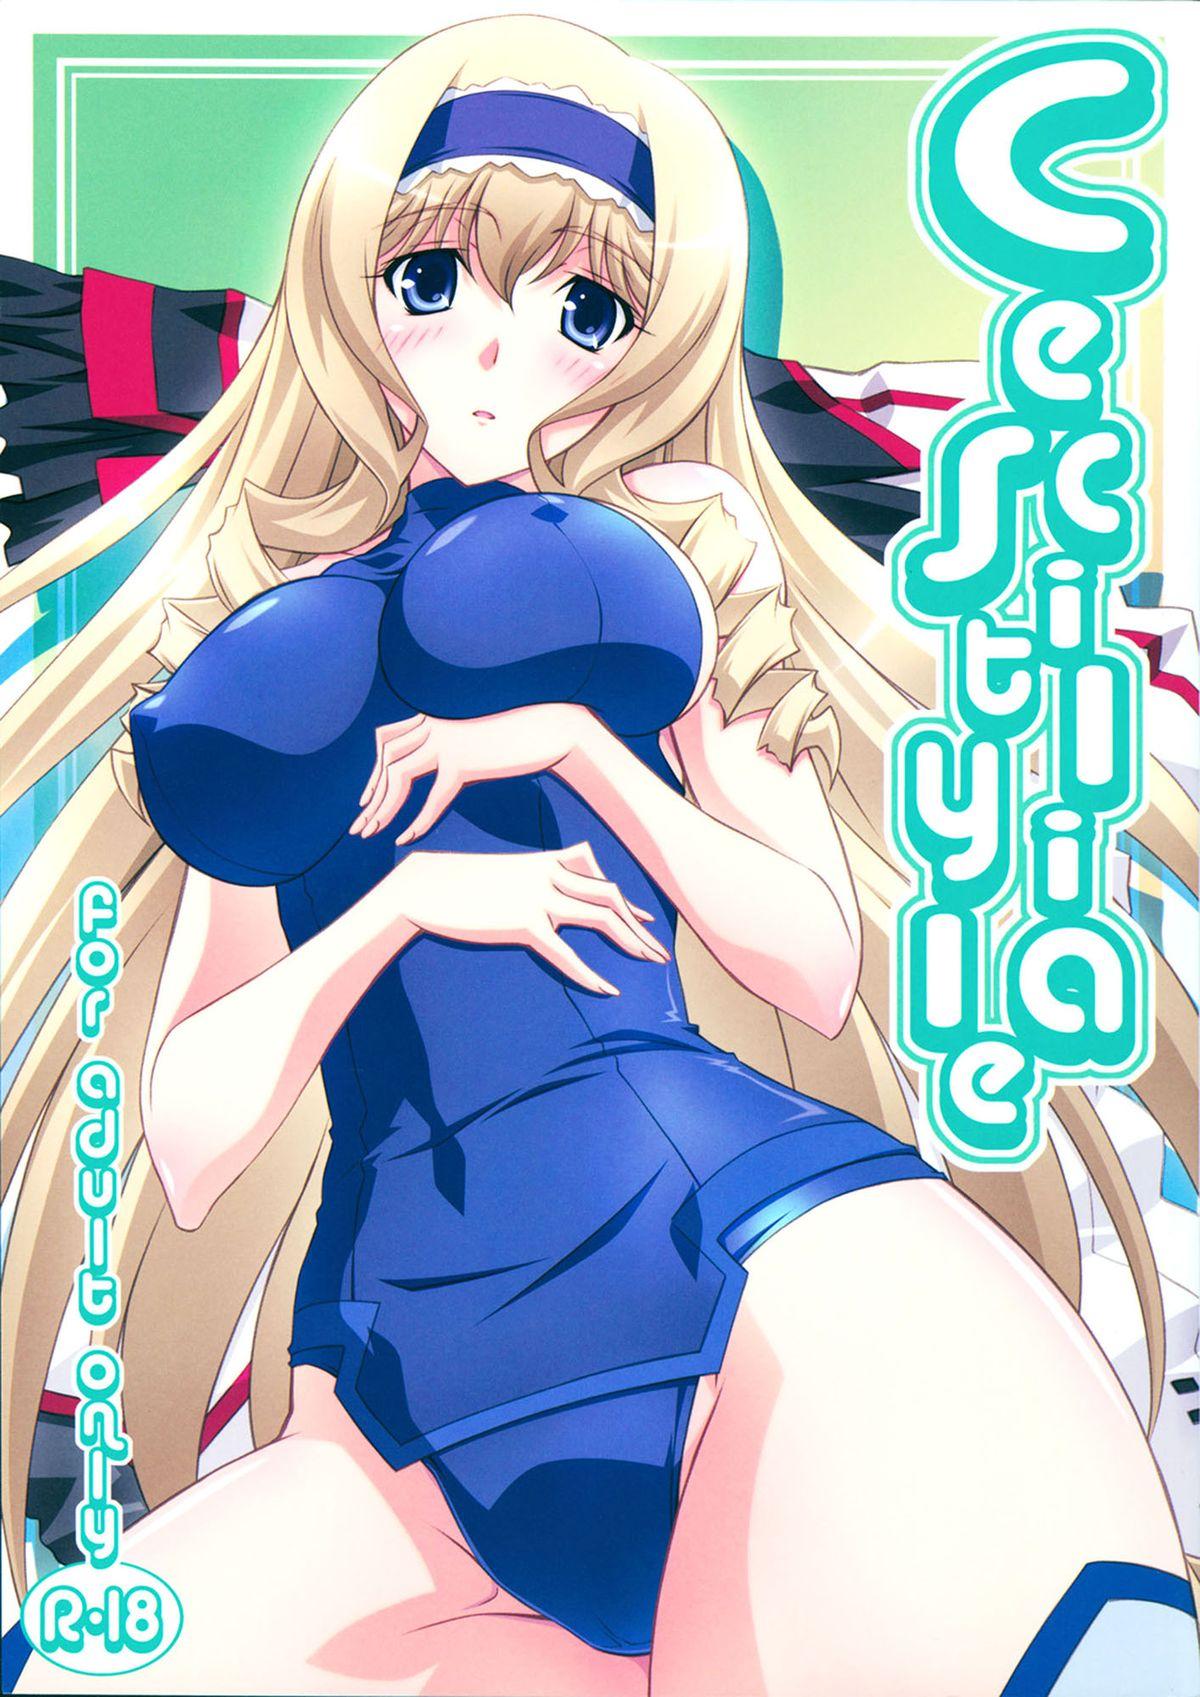 Orgy Cecilia Style - Infinite stratos Natural Tits - Page 3